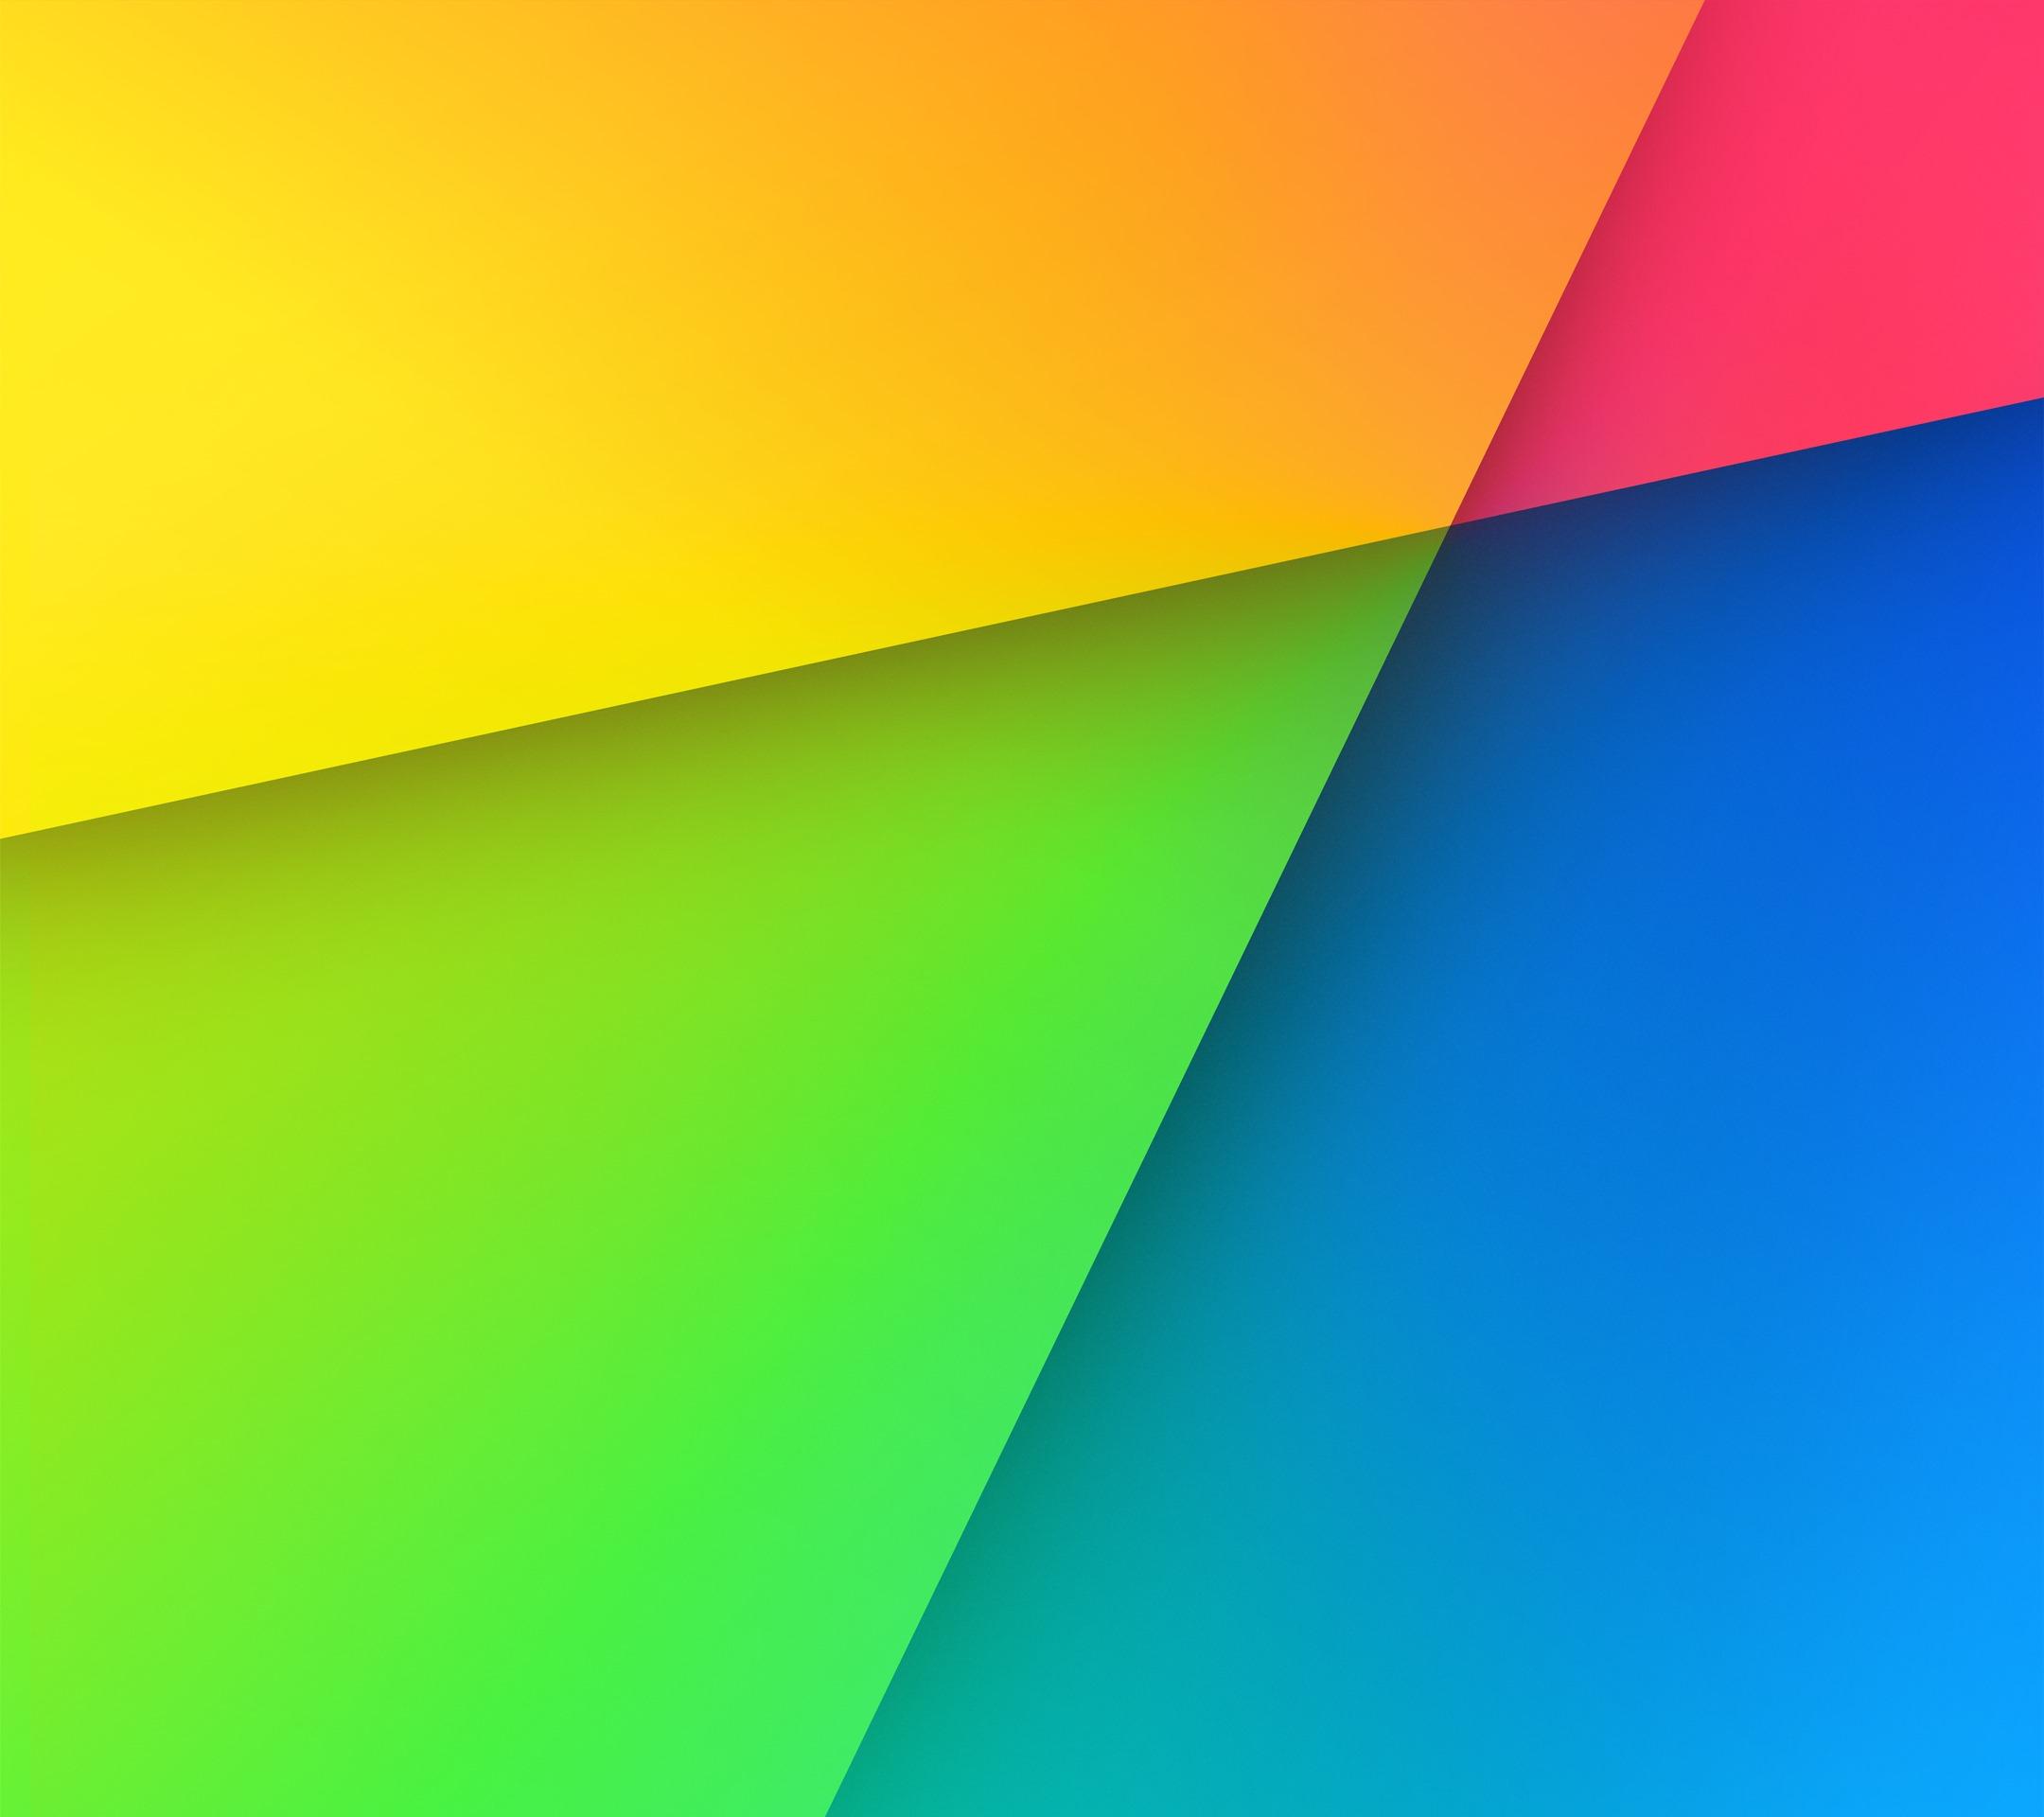 Download: Wallpaper From The New Nexus 7 [Updated]